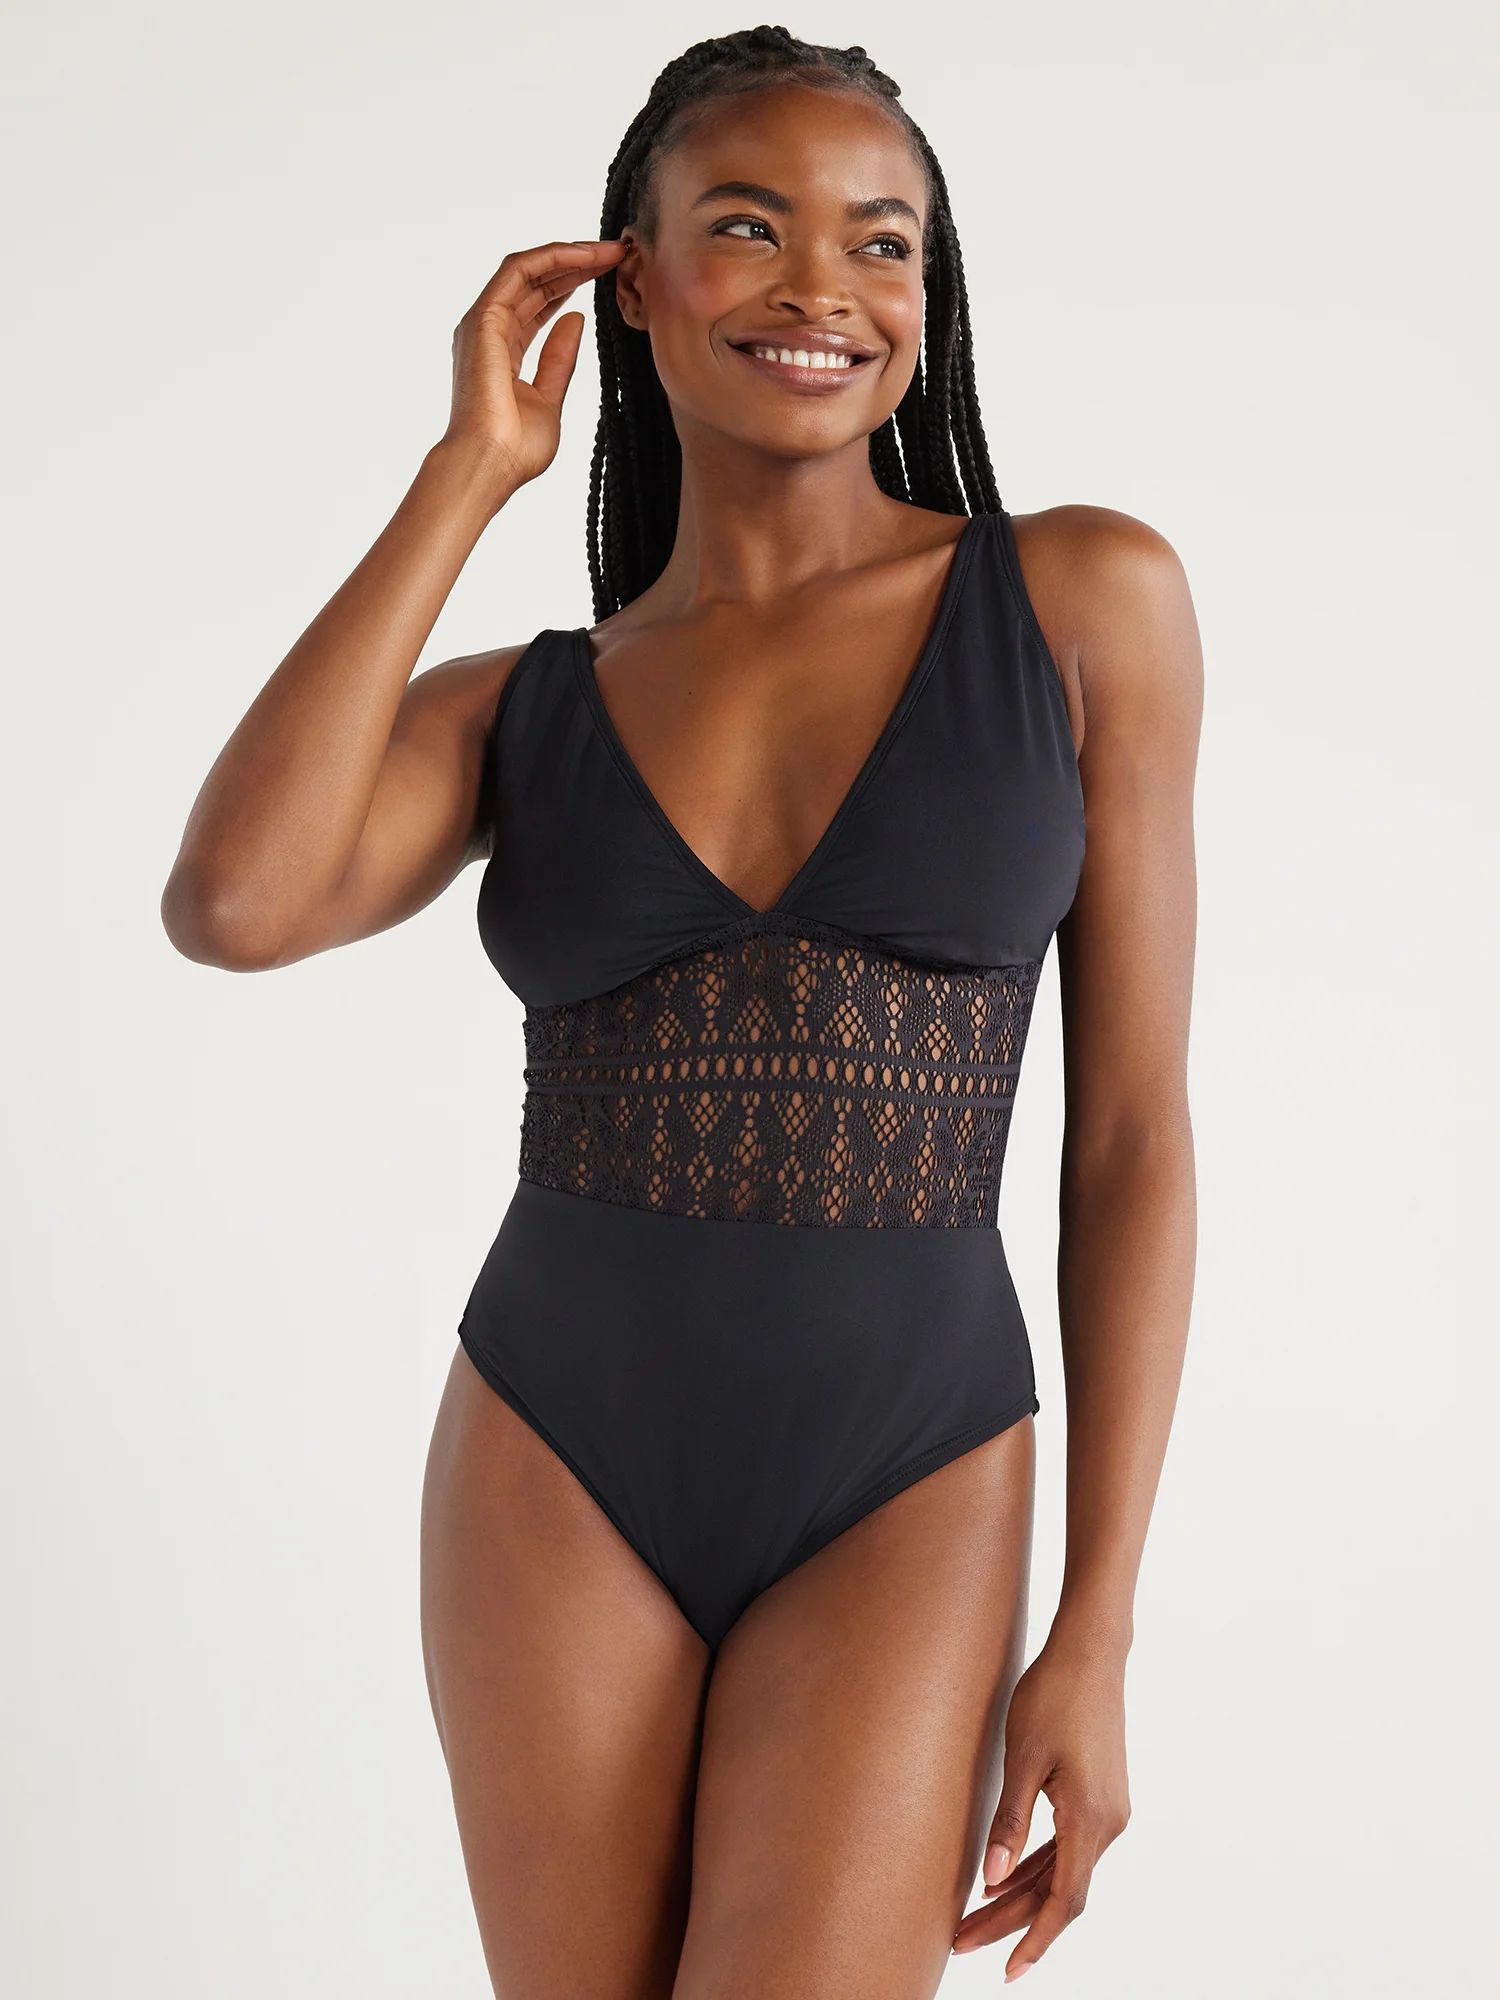 Time and Tru Women’s and Plus Black Crochet Plunge One Piece Swimsuit, Sizes XS-3X | Walmart (US)